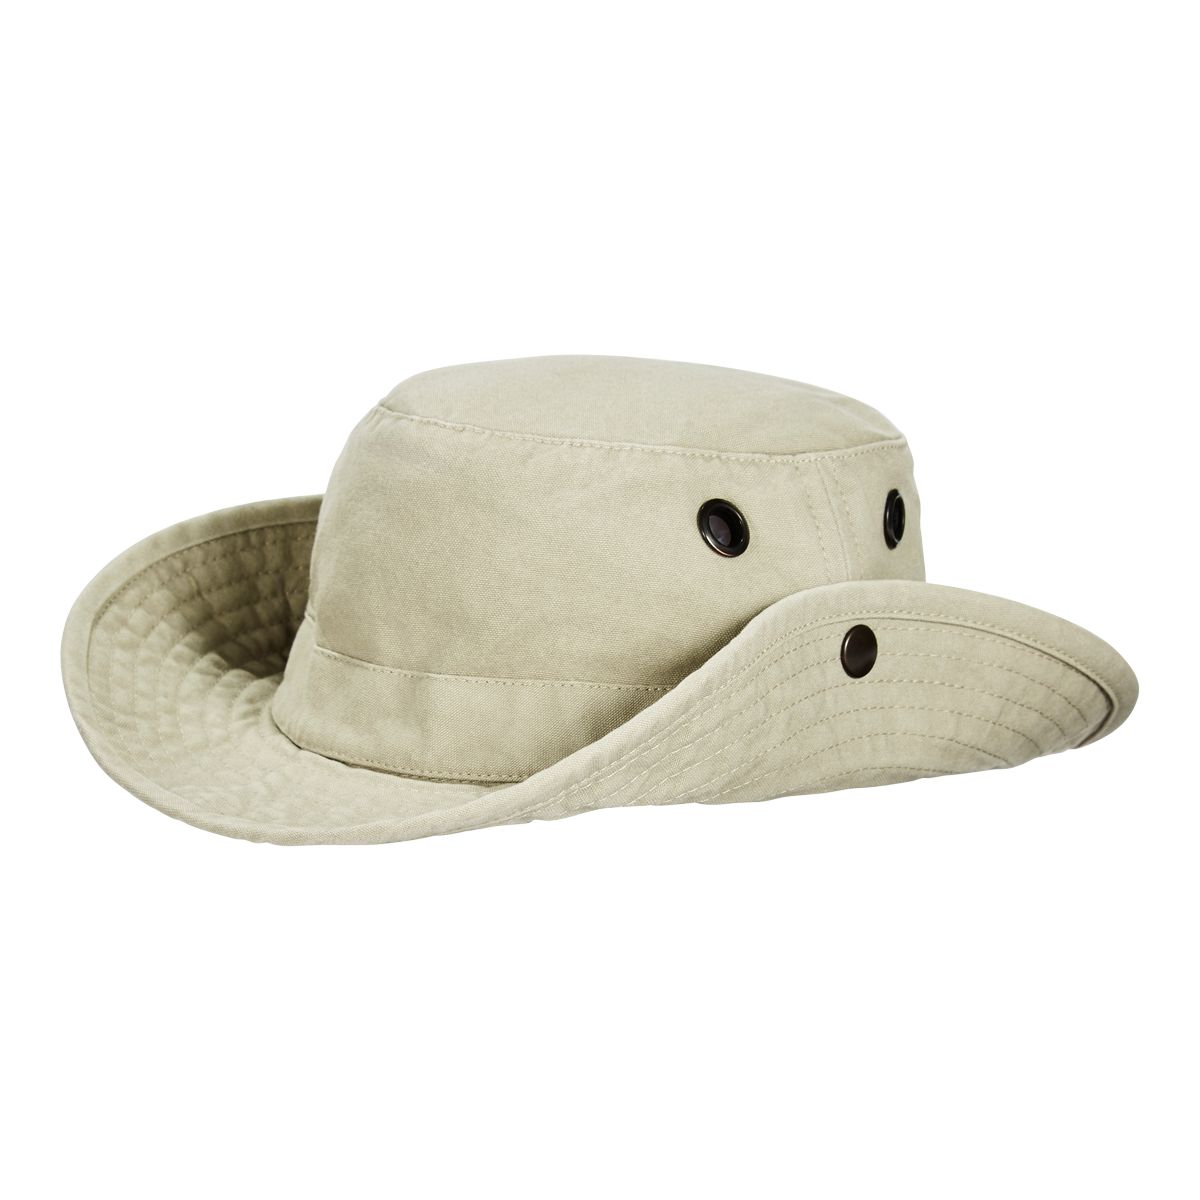 https://media-www.atmosphere.ca/product/div-03-softgoods/dpt-79-clothing-accessories/sdpt-02-womens/333804235/tilley-wanderer-brim-hat-322-khaki-484f0f08-d631-47be-8d0c-545ab6249f9a-jpgrendition.jpg